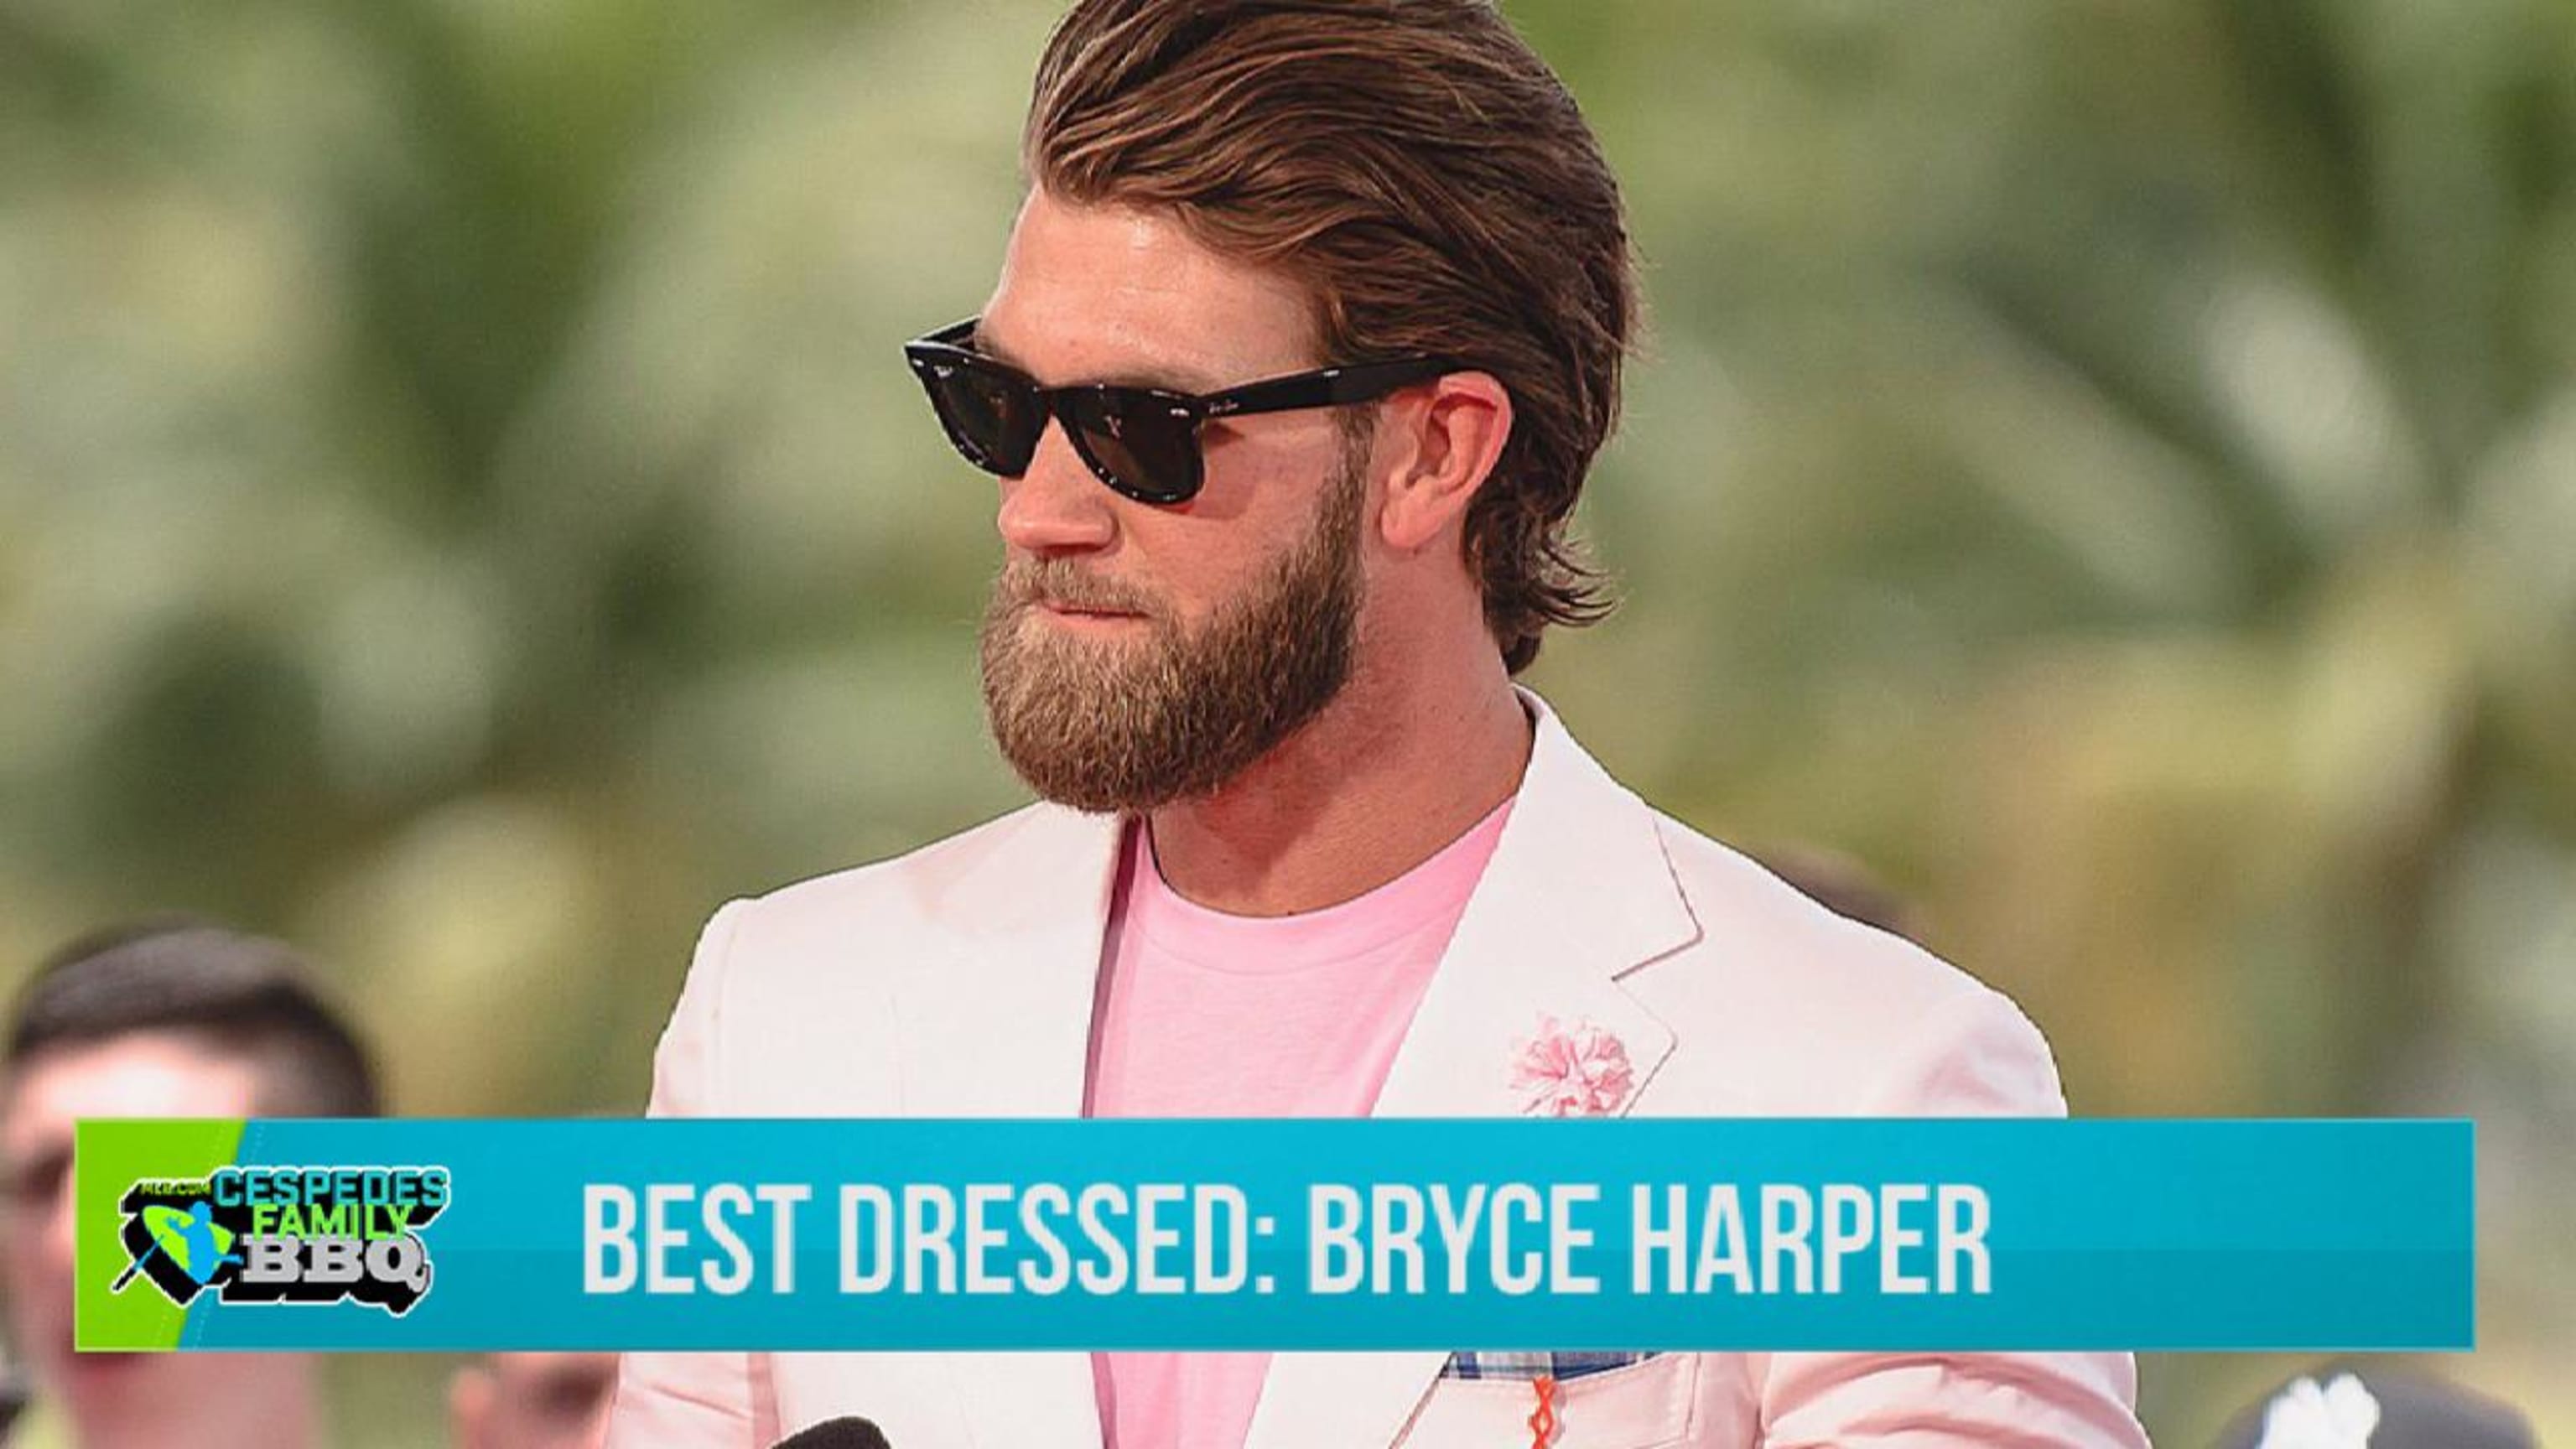 Bryce Harper unsurprisingly earns Best Dressed in these